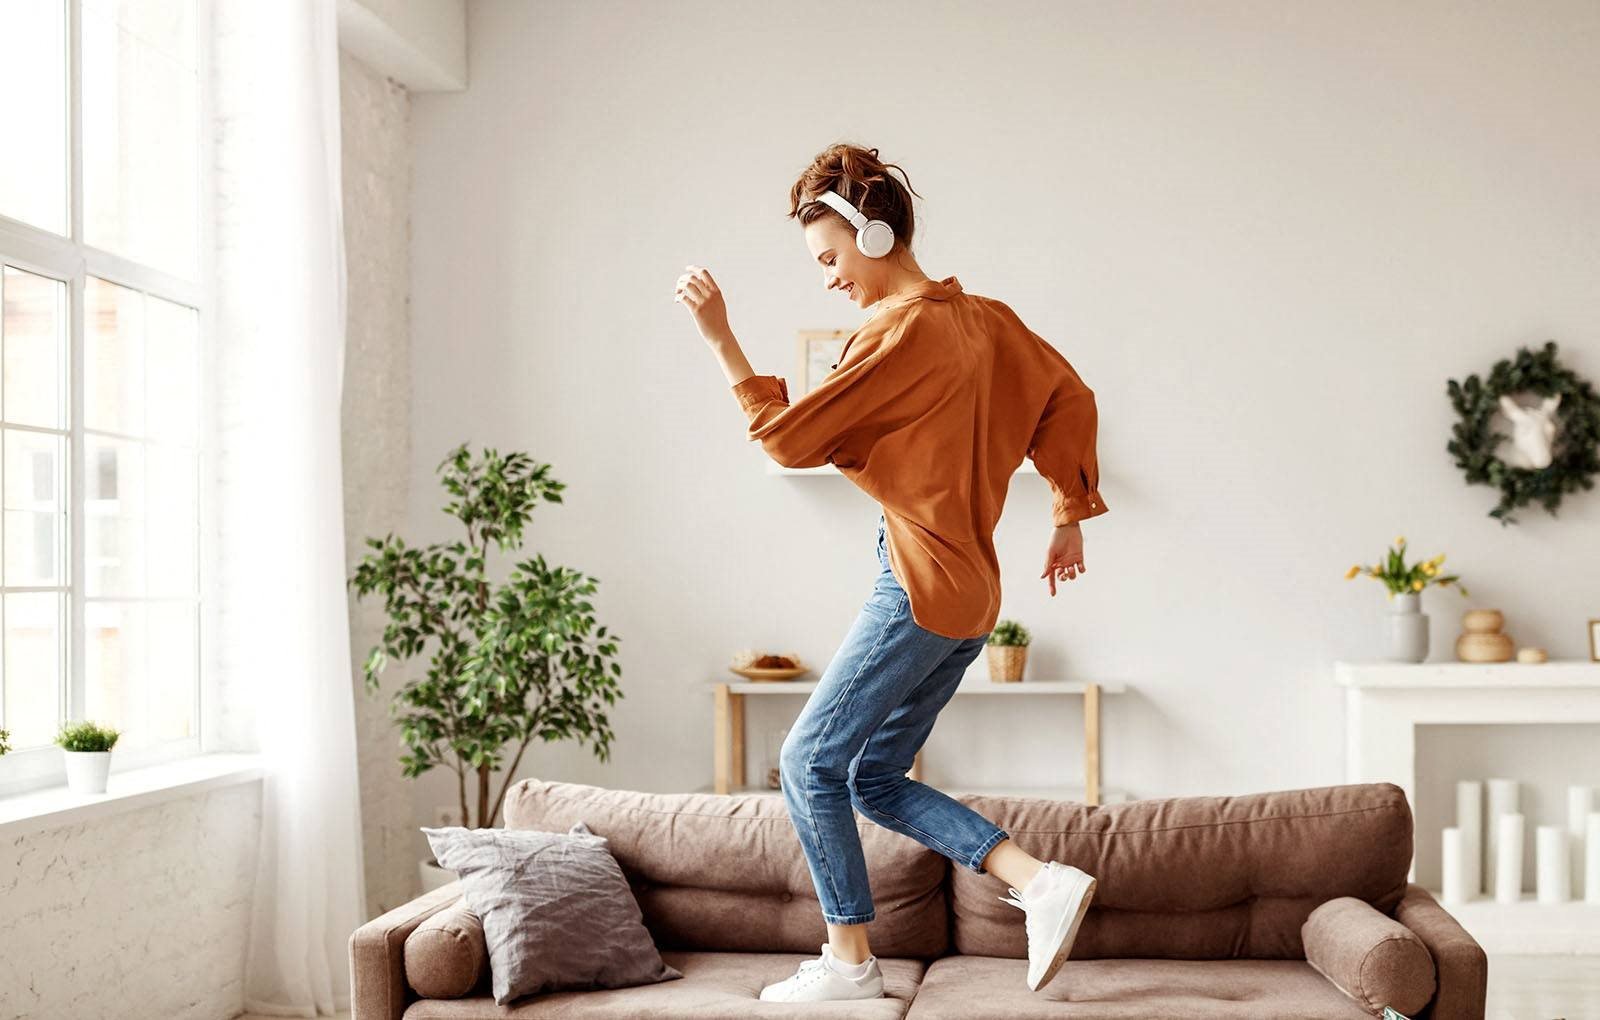 Girl dancing on couch